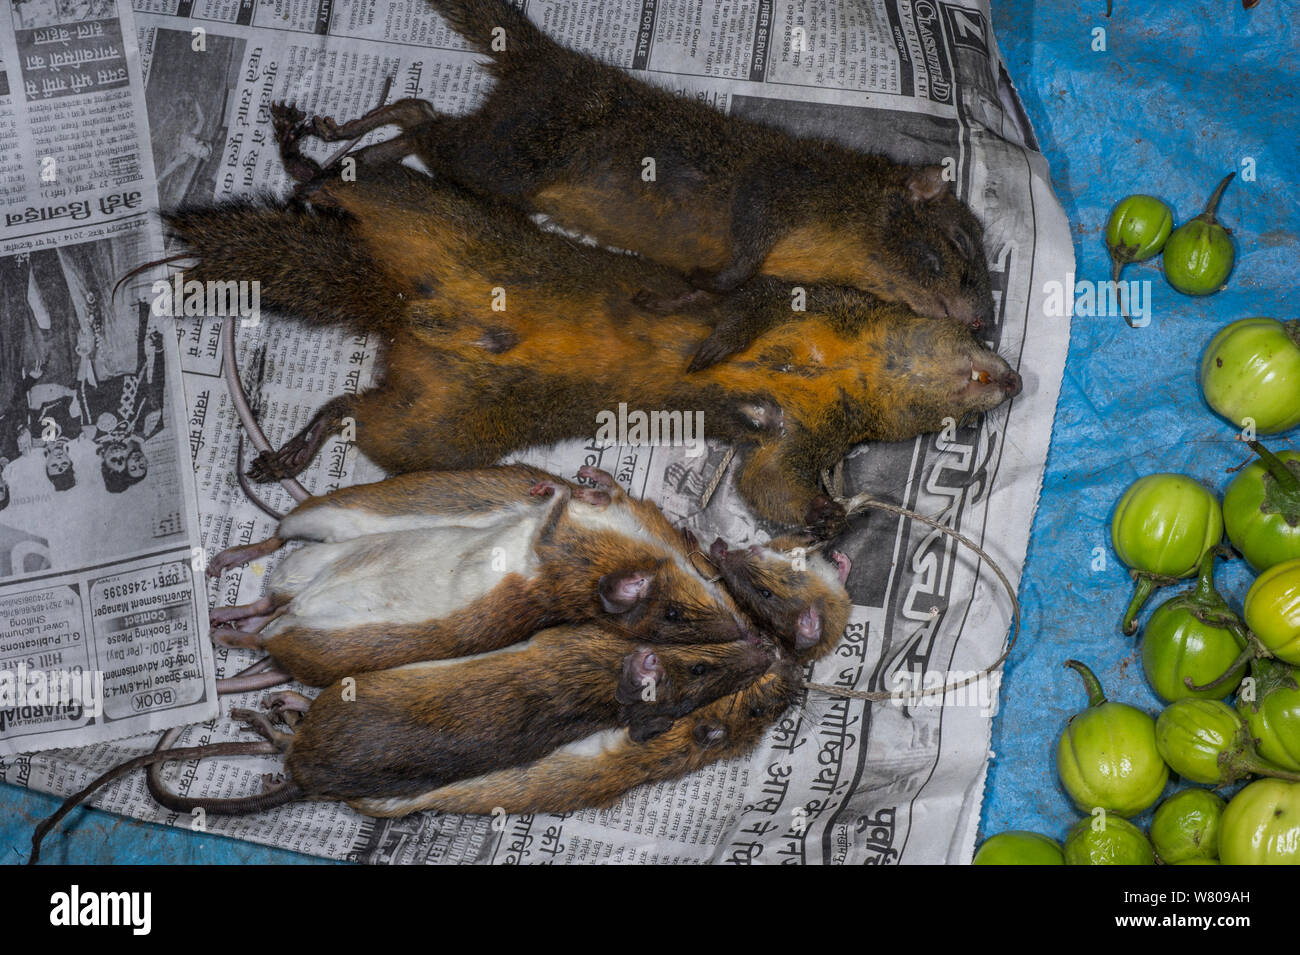 Rats and squirrels for sale in market for food, Apatani Tribe, Ziro Valley, Himalayan Foothills, Arunachal Pradesh.North East India, November 2014. Stock Photo